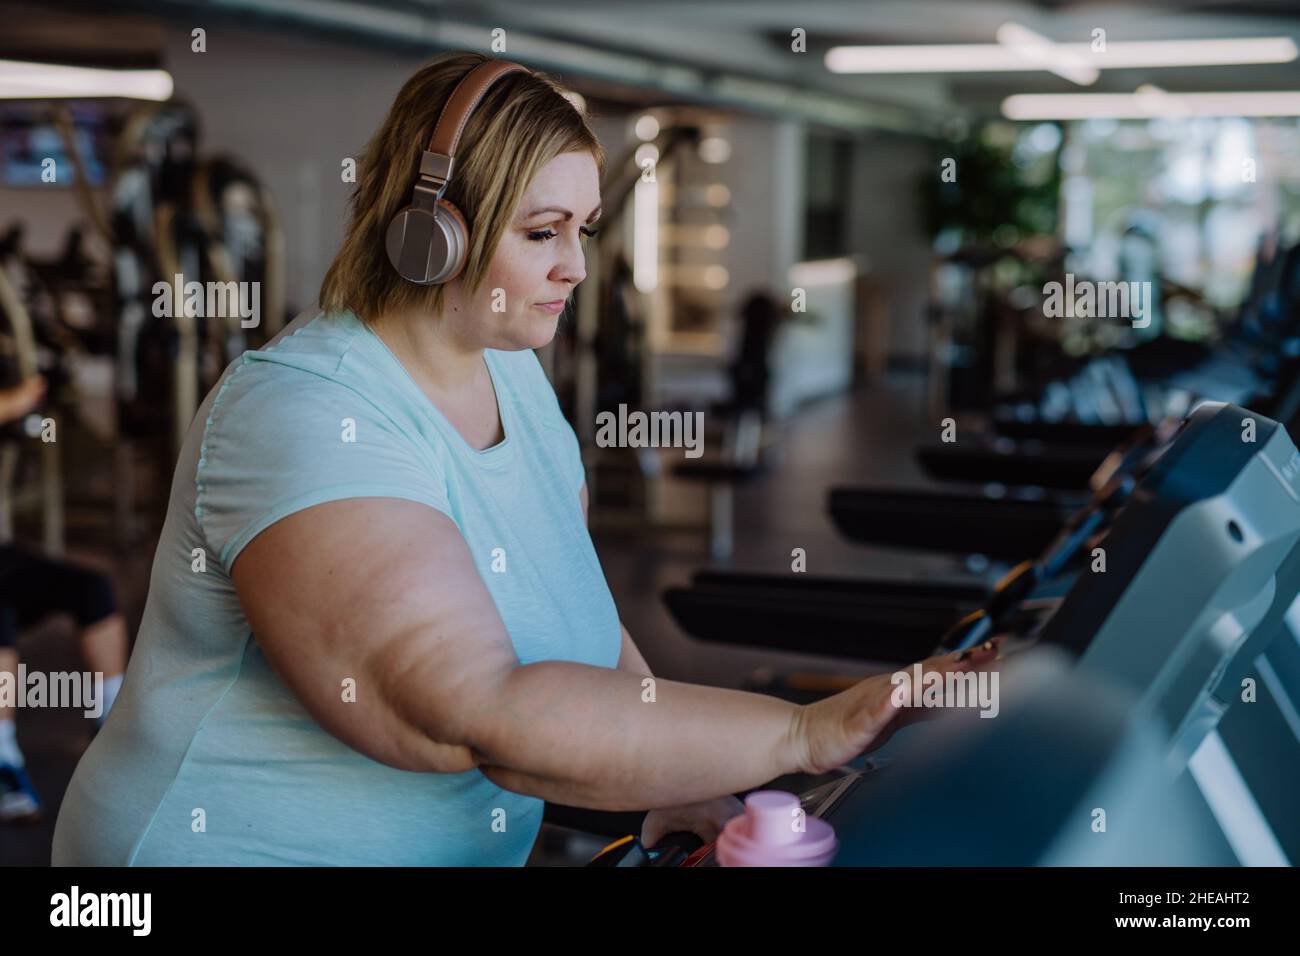 Mid adult overweight woman with headphones exercising on treadmill in gym Stock Photo